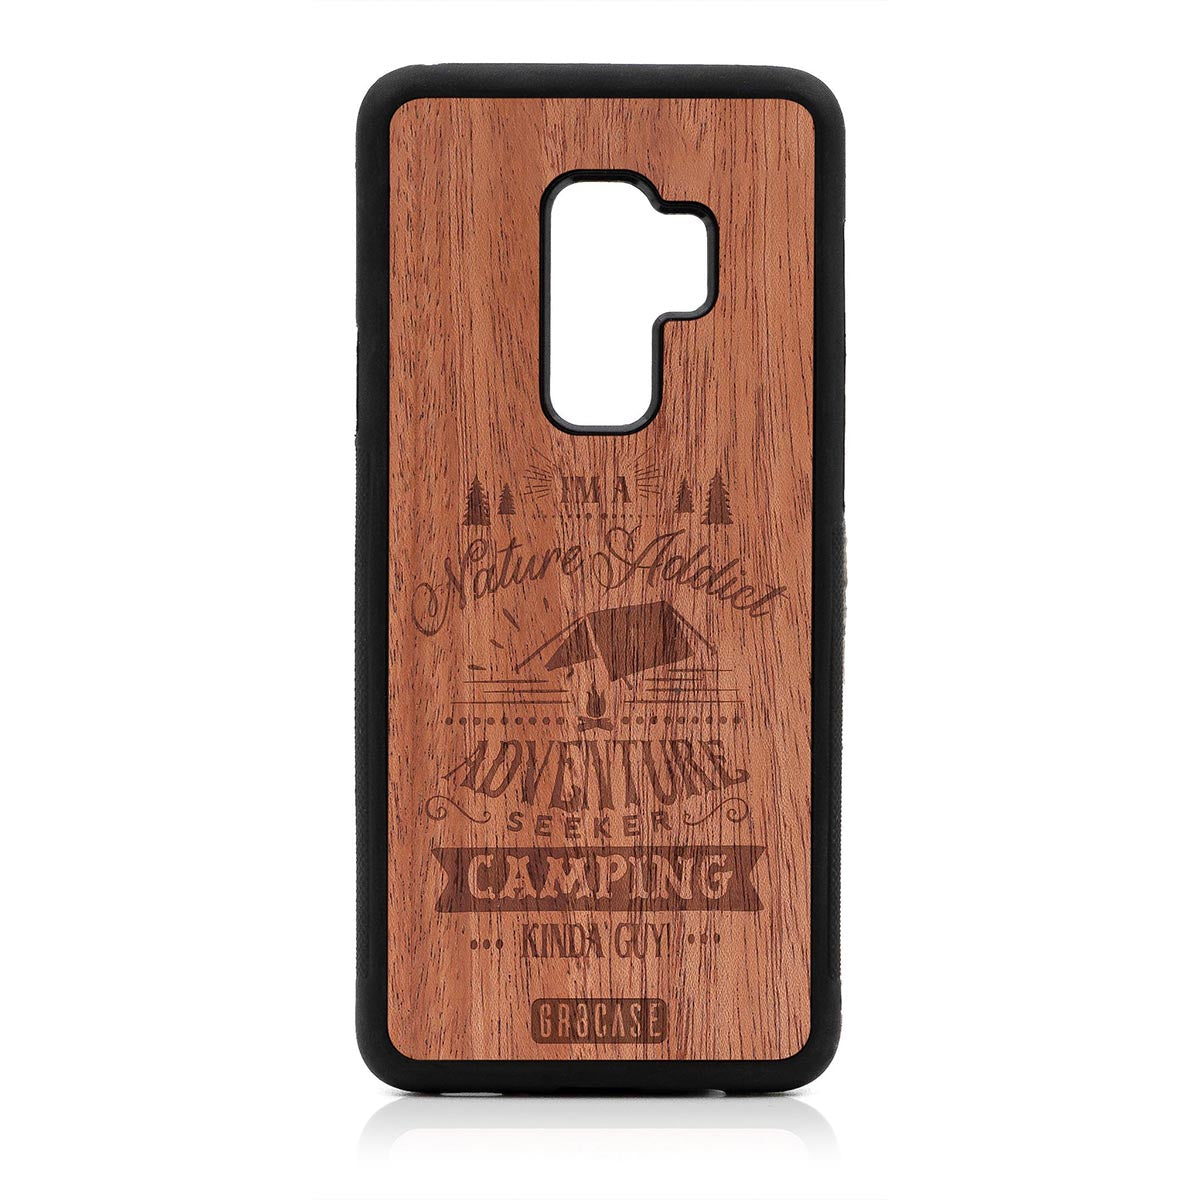 I'm A Nature Addict Adventure Seeker Camping Kinda Guy Design Wood Case Samsung Galaxy S9 Plus by GR8CASE